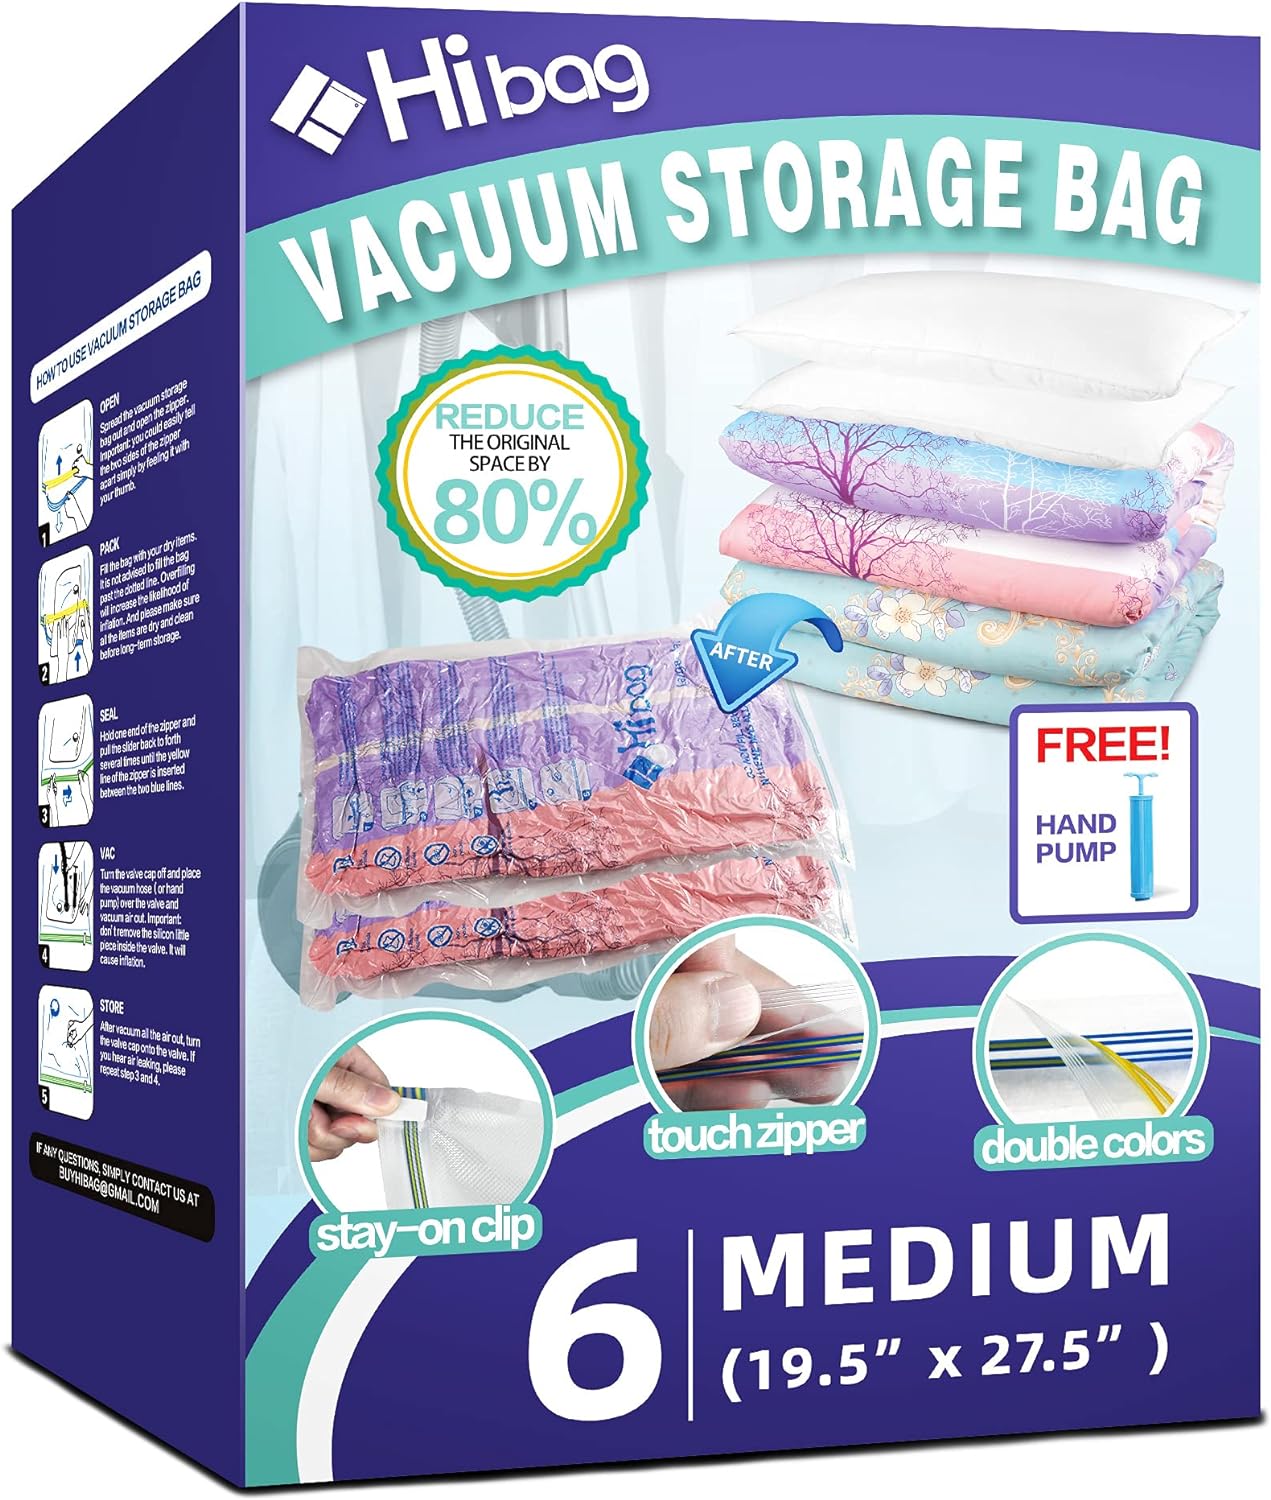 6 Pack Vacuum Storage Bags for Clothes, Clothes Vacuum Bags Save 80% Space, Work with Vacuum Cleaner, Travel Hand Pump Included (6-Medium)